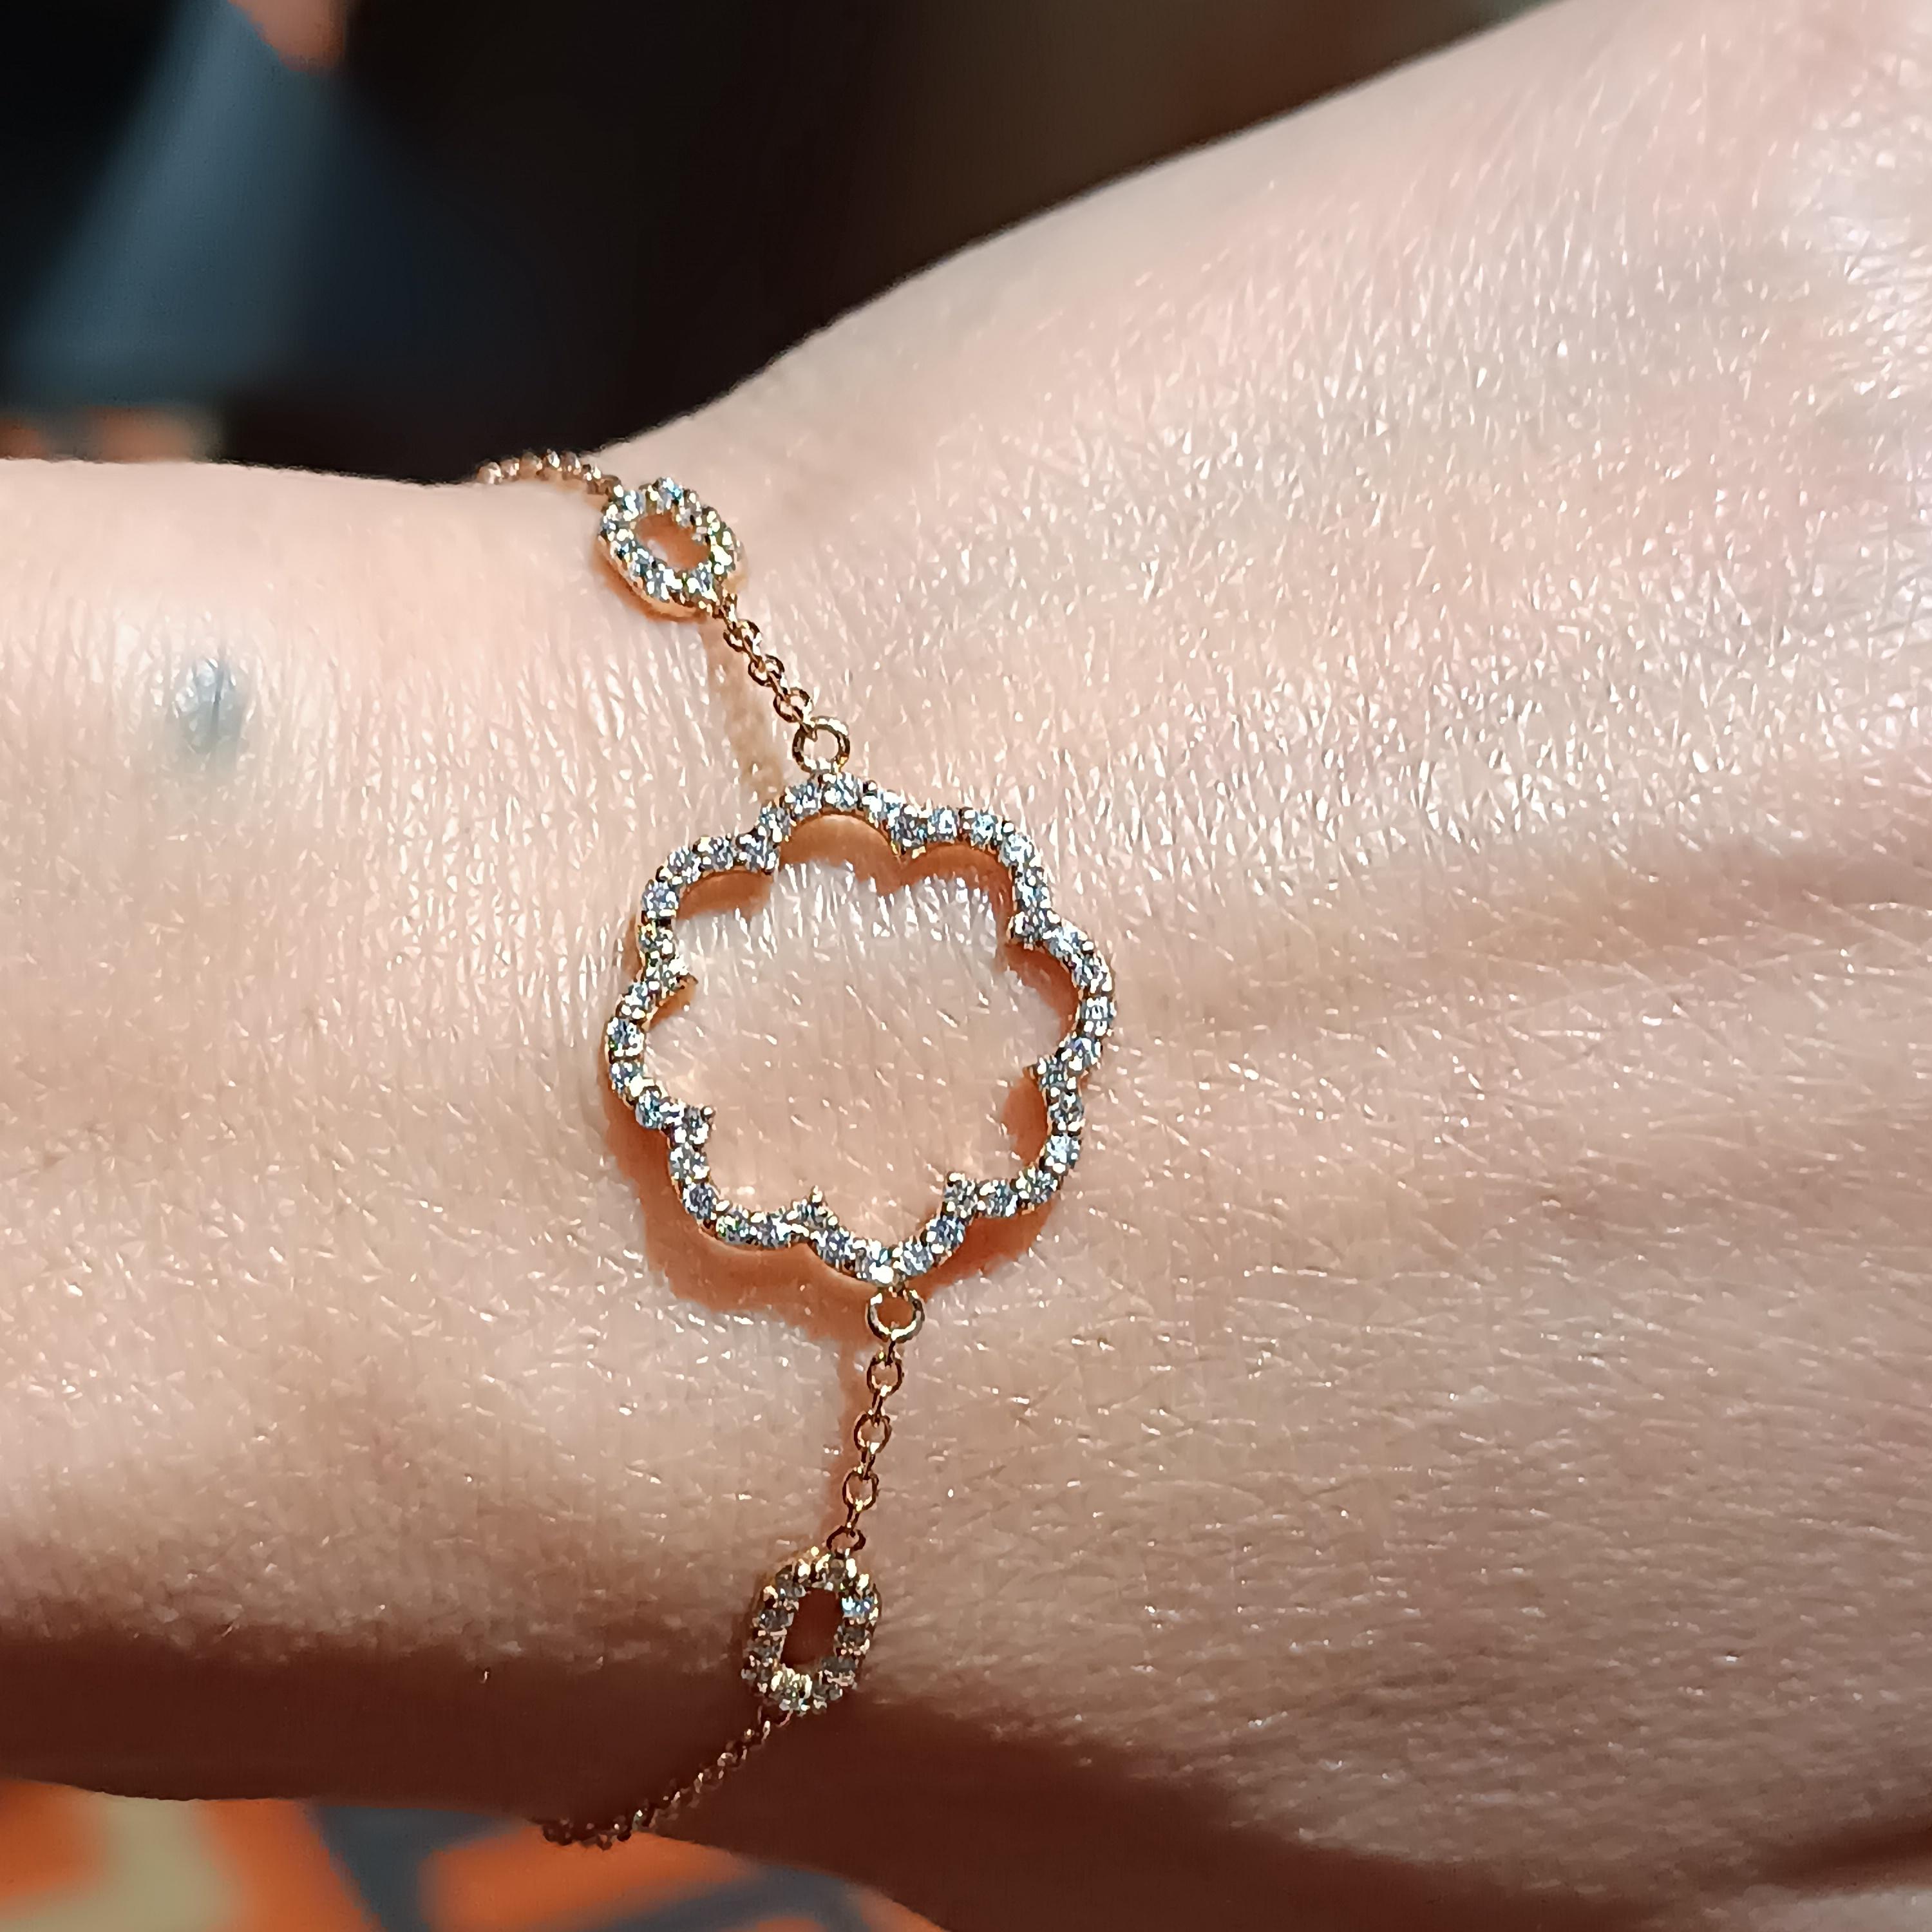 Magnificent and bright VS G color diamond  Carat 0.61  Bracelet in 18 carat rose gold Grams 3.54 total diamonds stones 61
Simplicity at it's best, one of our most sold item. the size of the bracelet starts to 16 cm and is adjustable up to 17cm
any